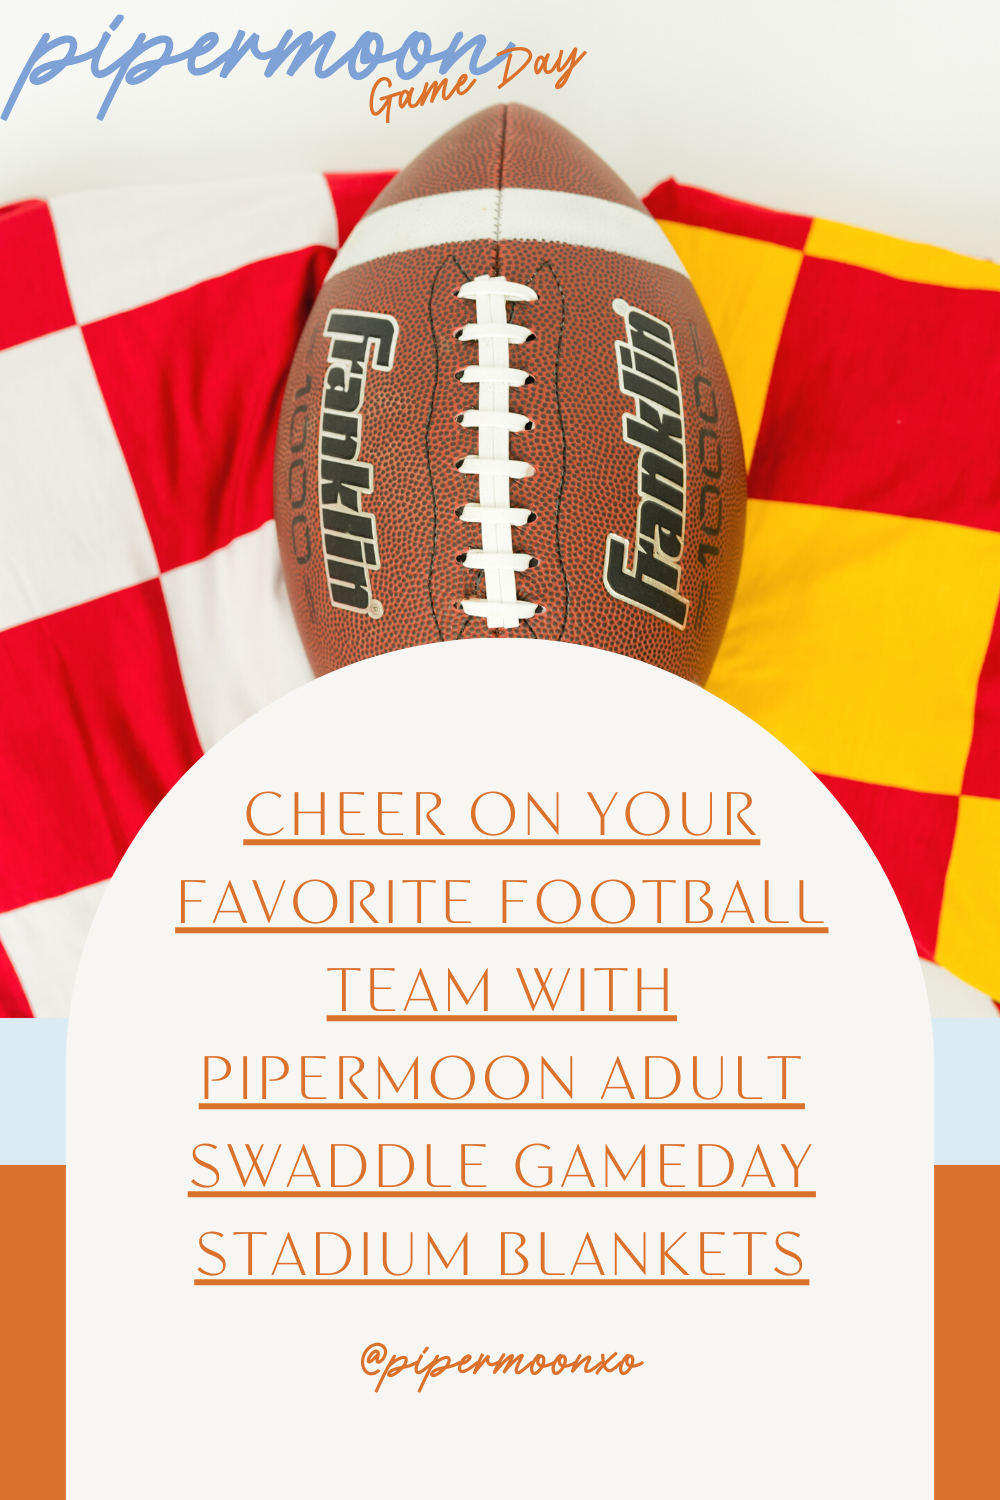 Cheer on your favorite football team with Pipermoon Adult Swaddle Gameday Stadium Blankets